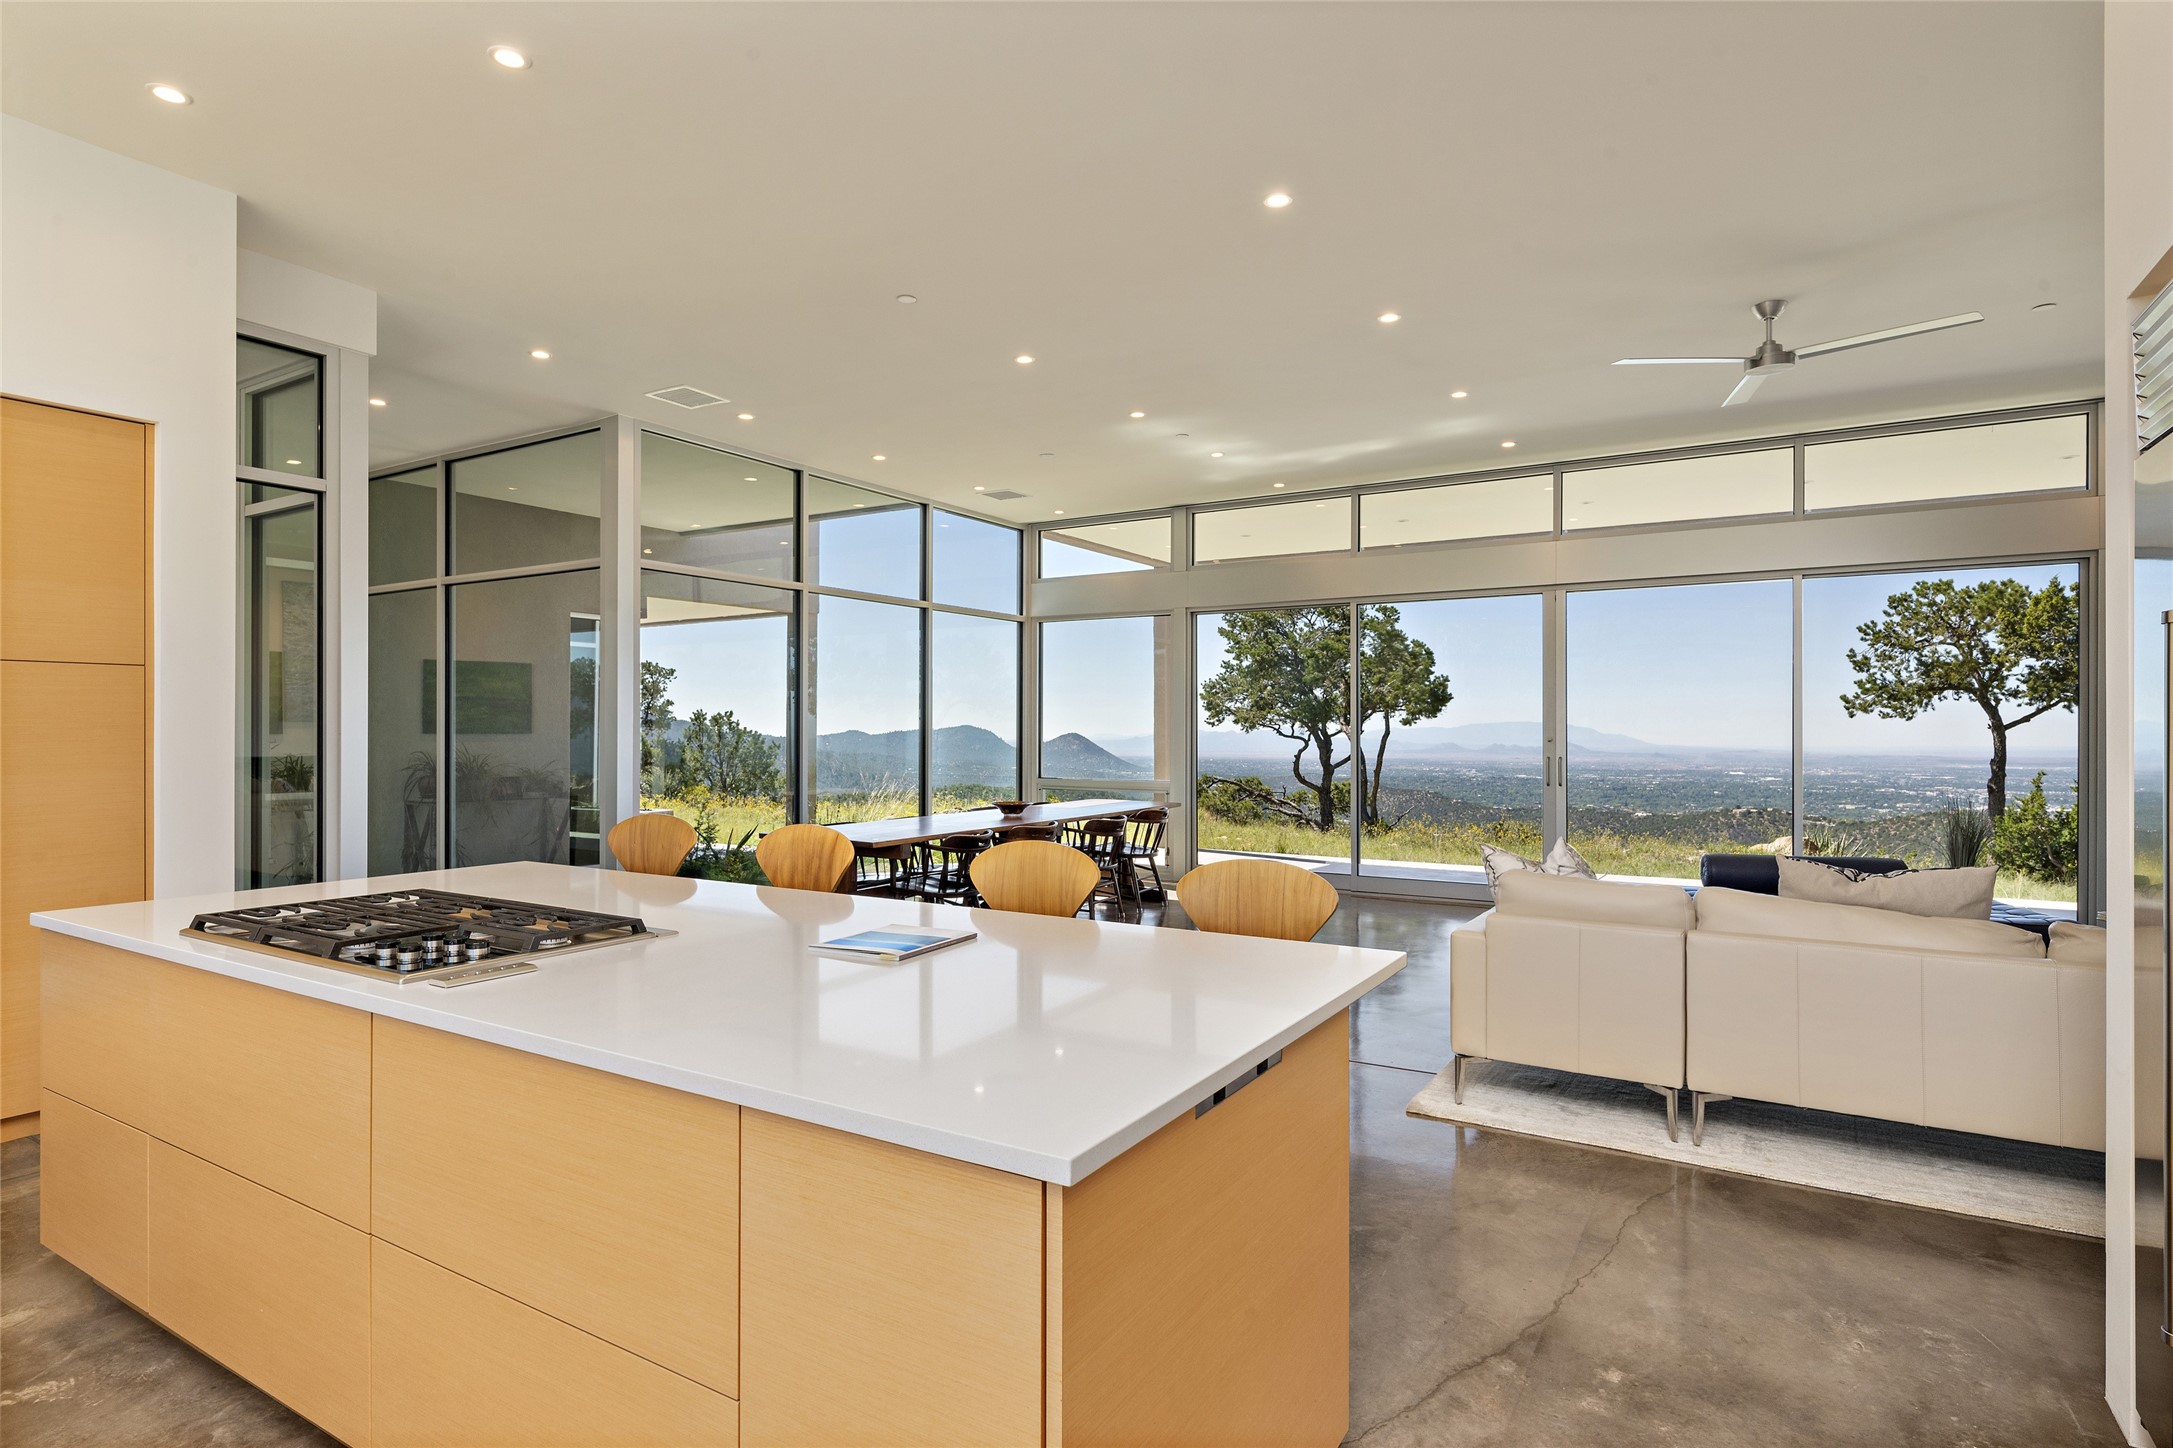 Kitchen with Large Island and Views